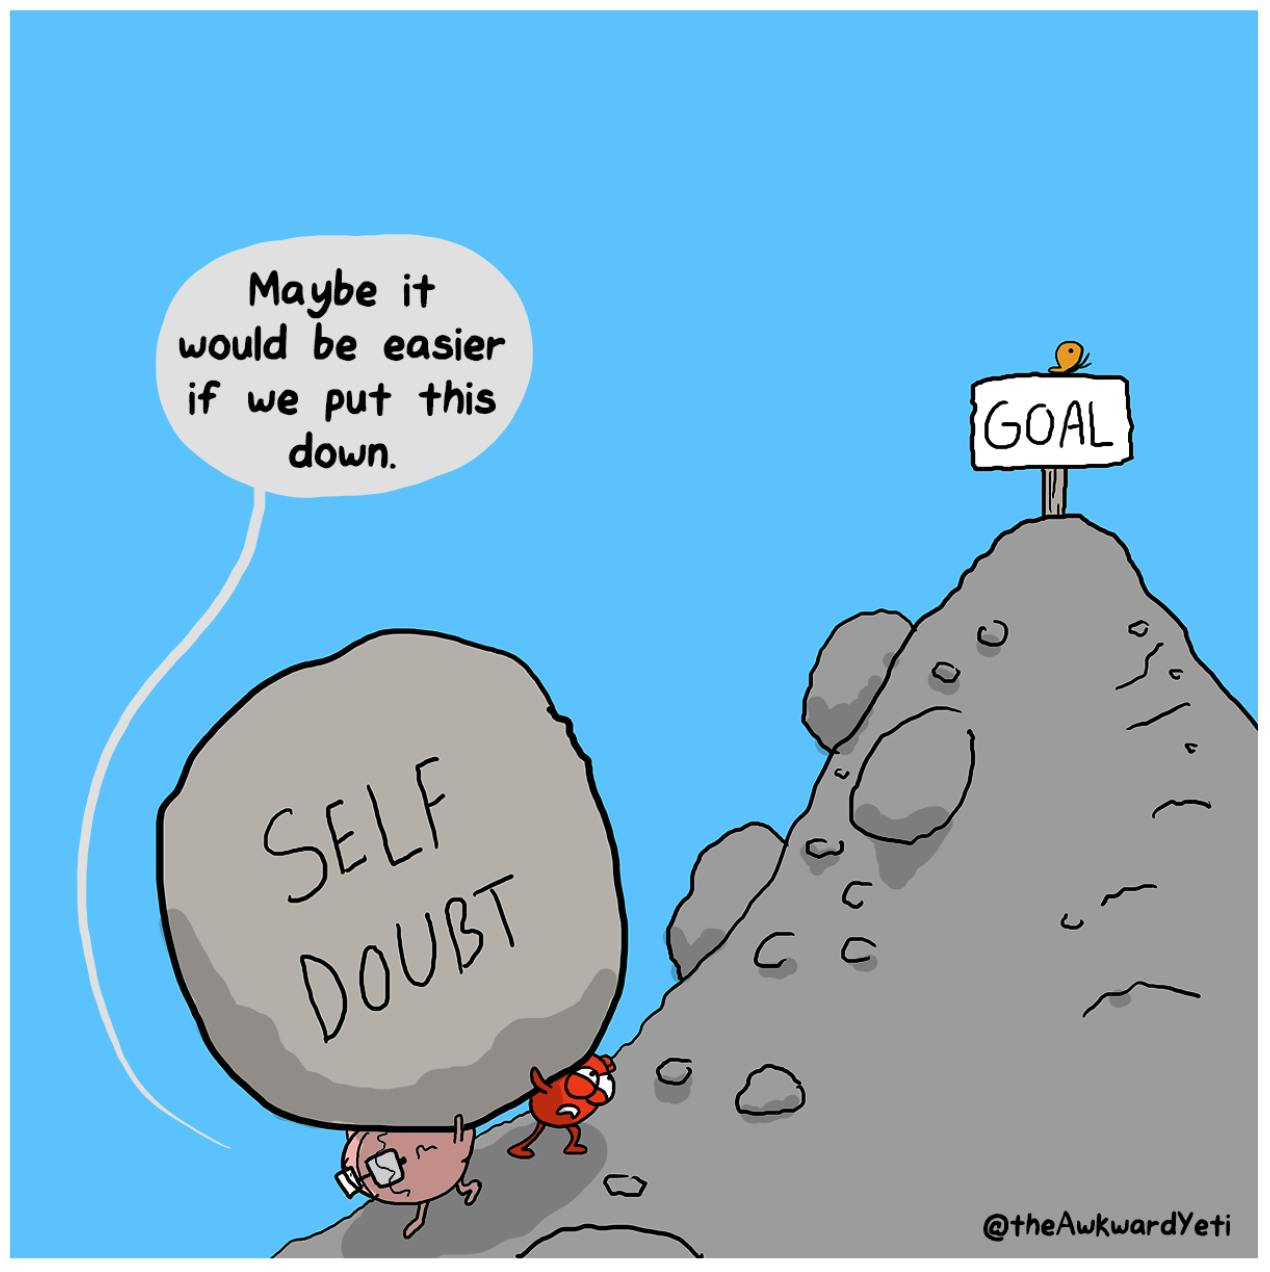 a comic from The Awkward Yeti about getting rid of self doubt